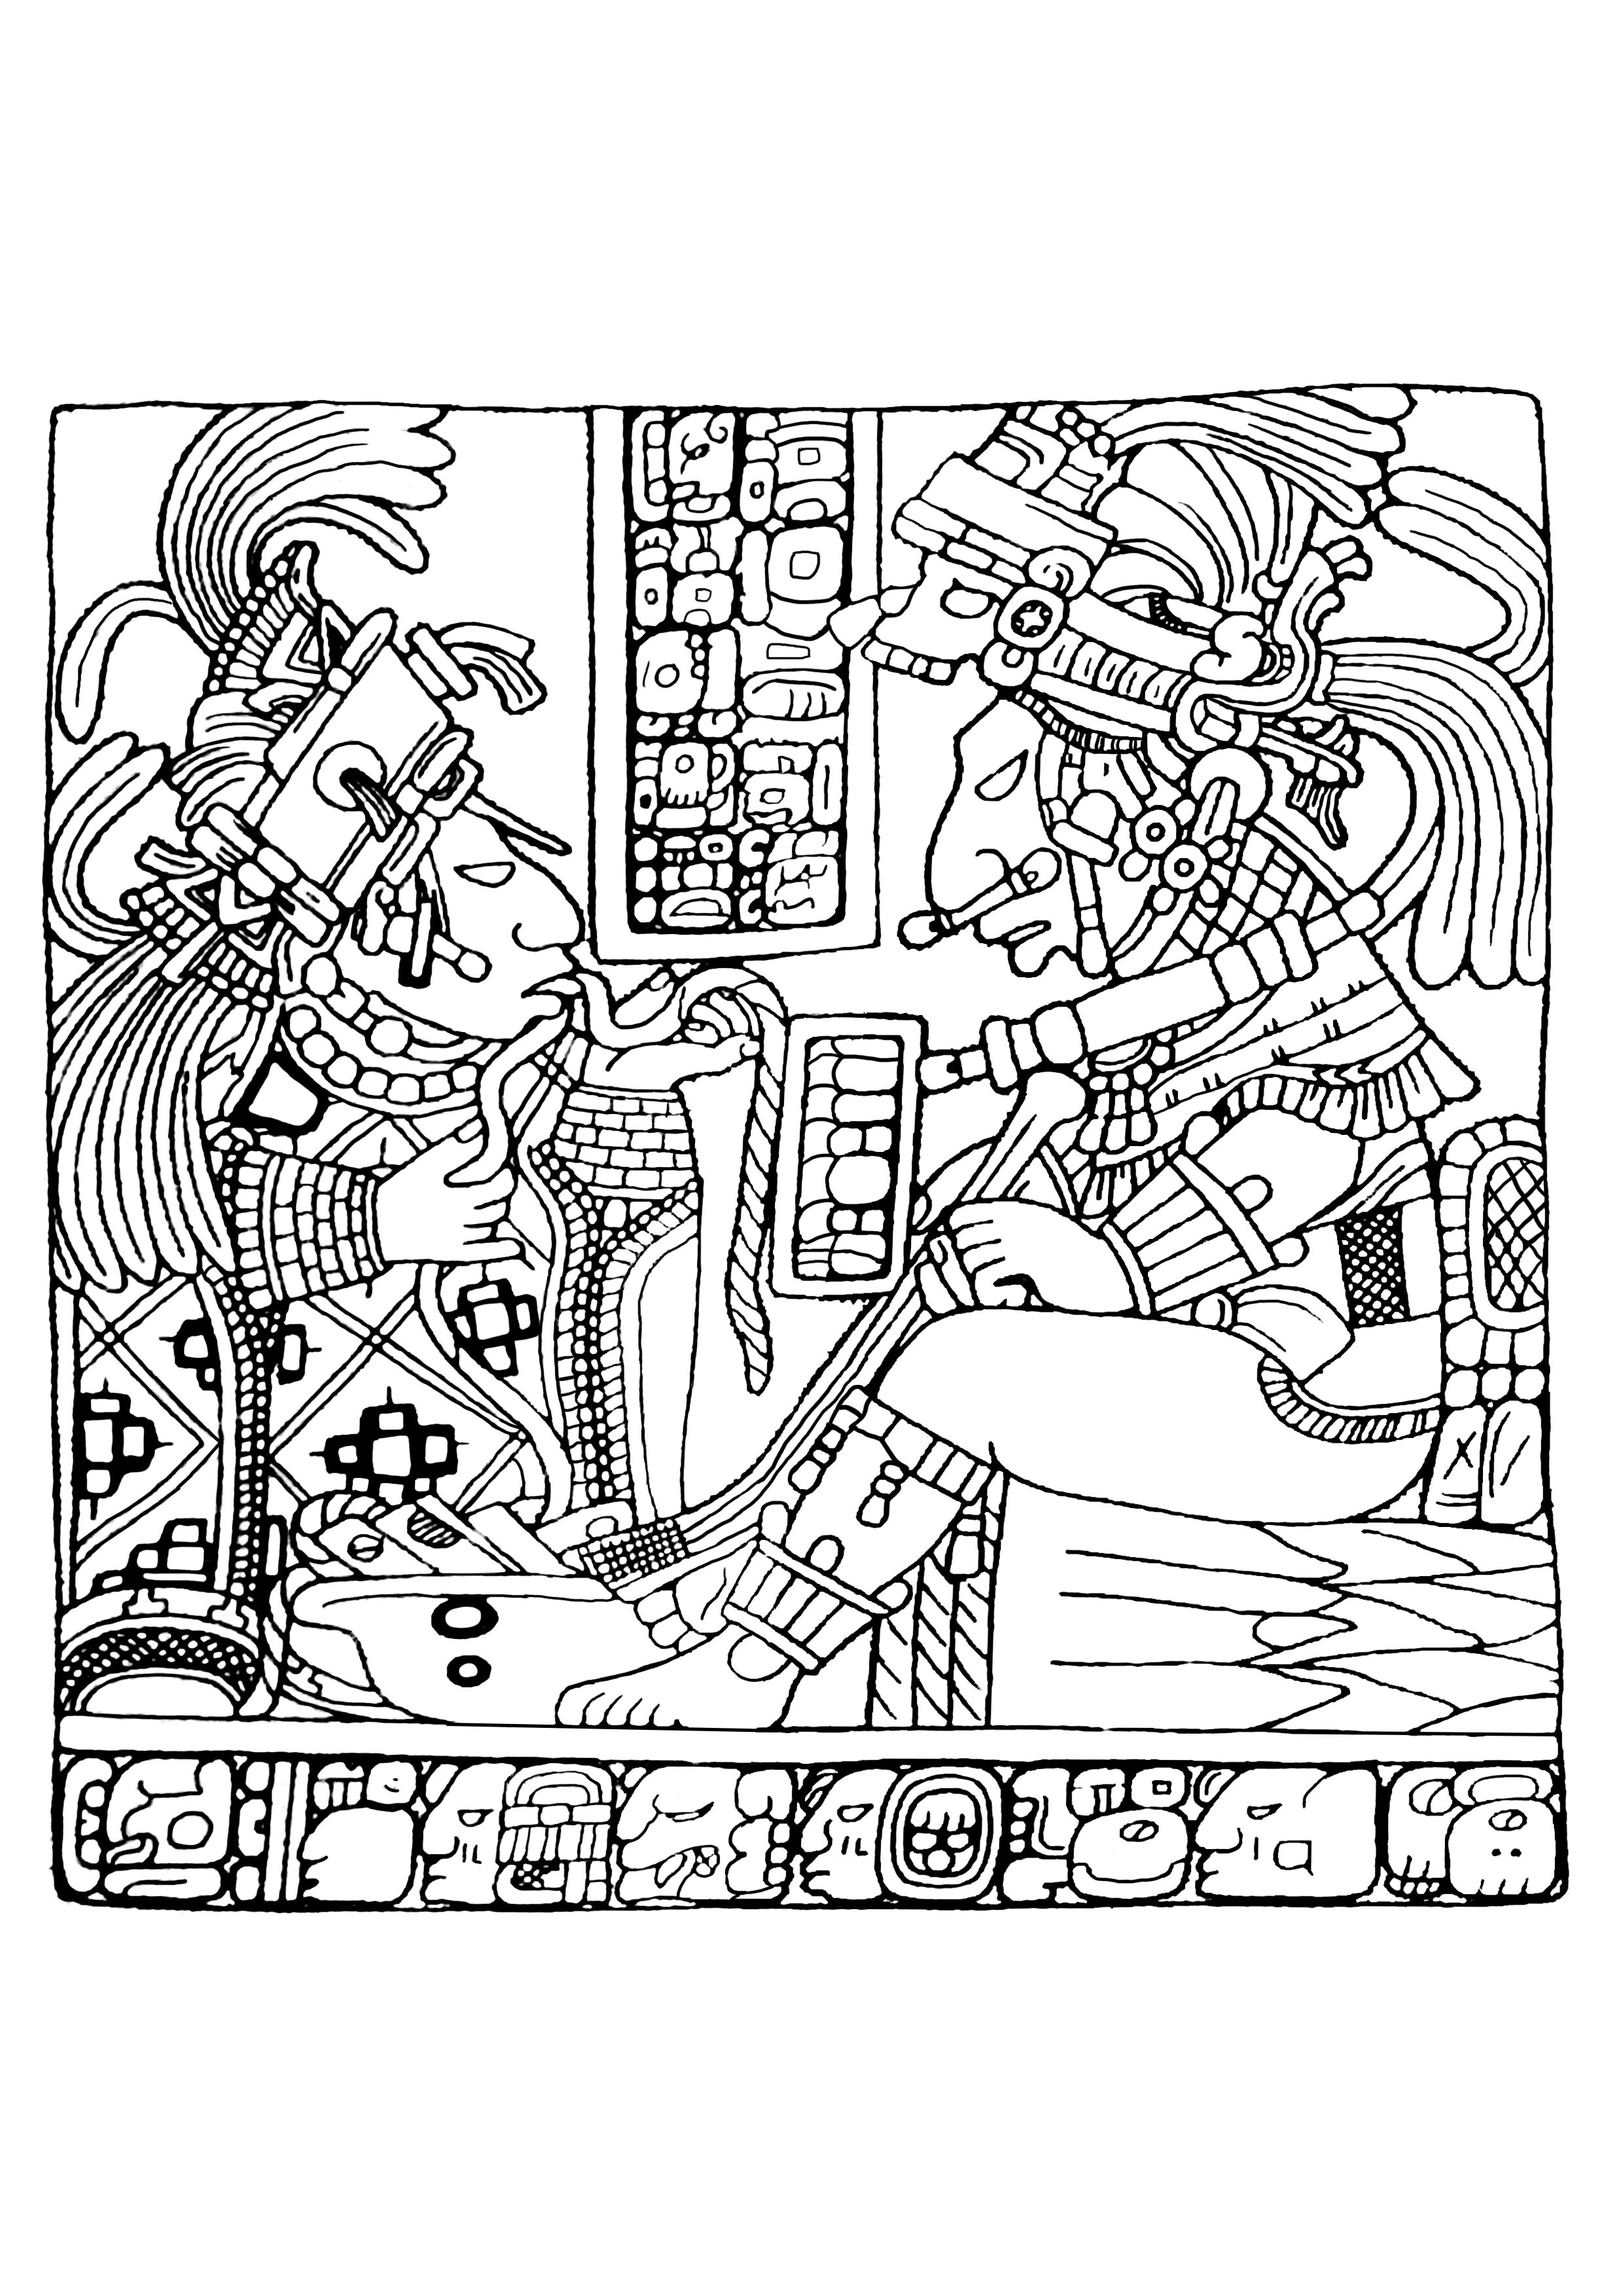 Complex coloring page created from Maya panel (Second half 8th century), visible at the British Museum (London).